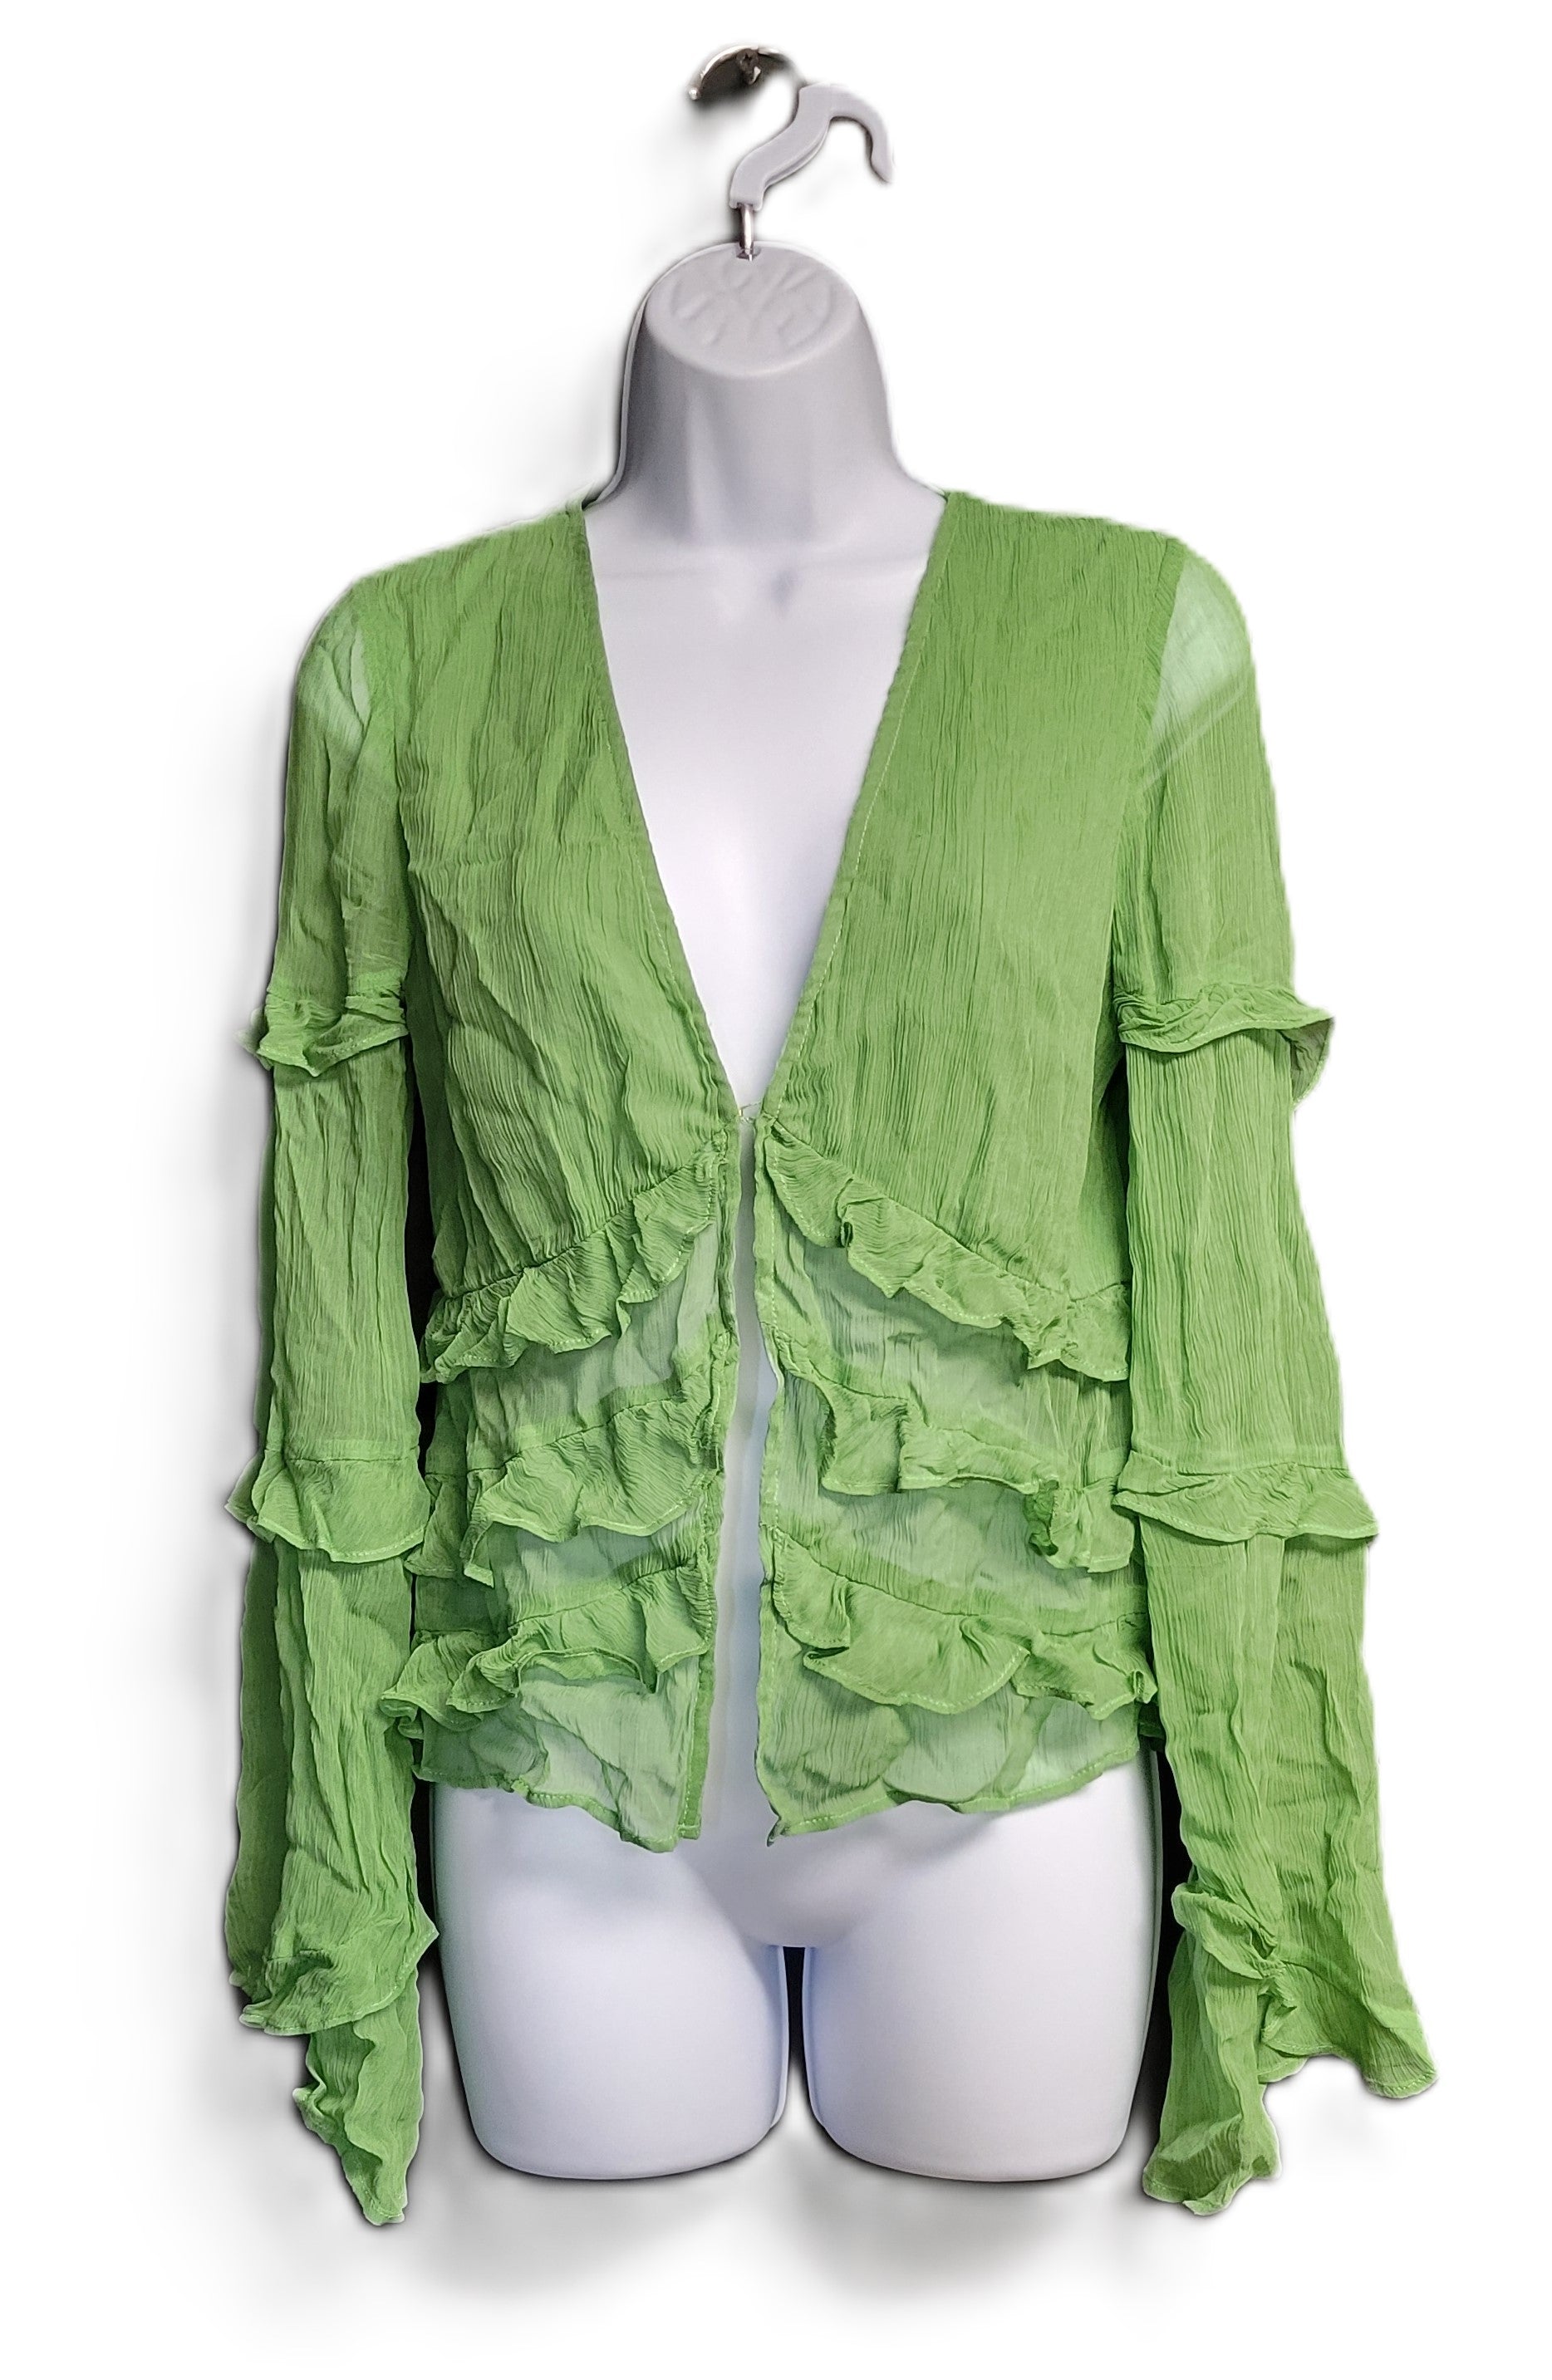 House of Harlow 1960 x REVOLVE Maxime Blouse in Light Green Size Small